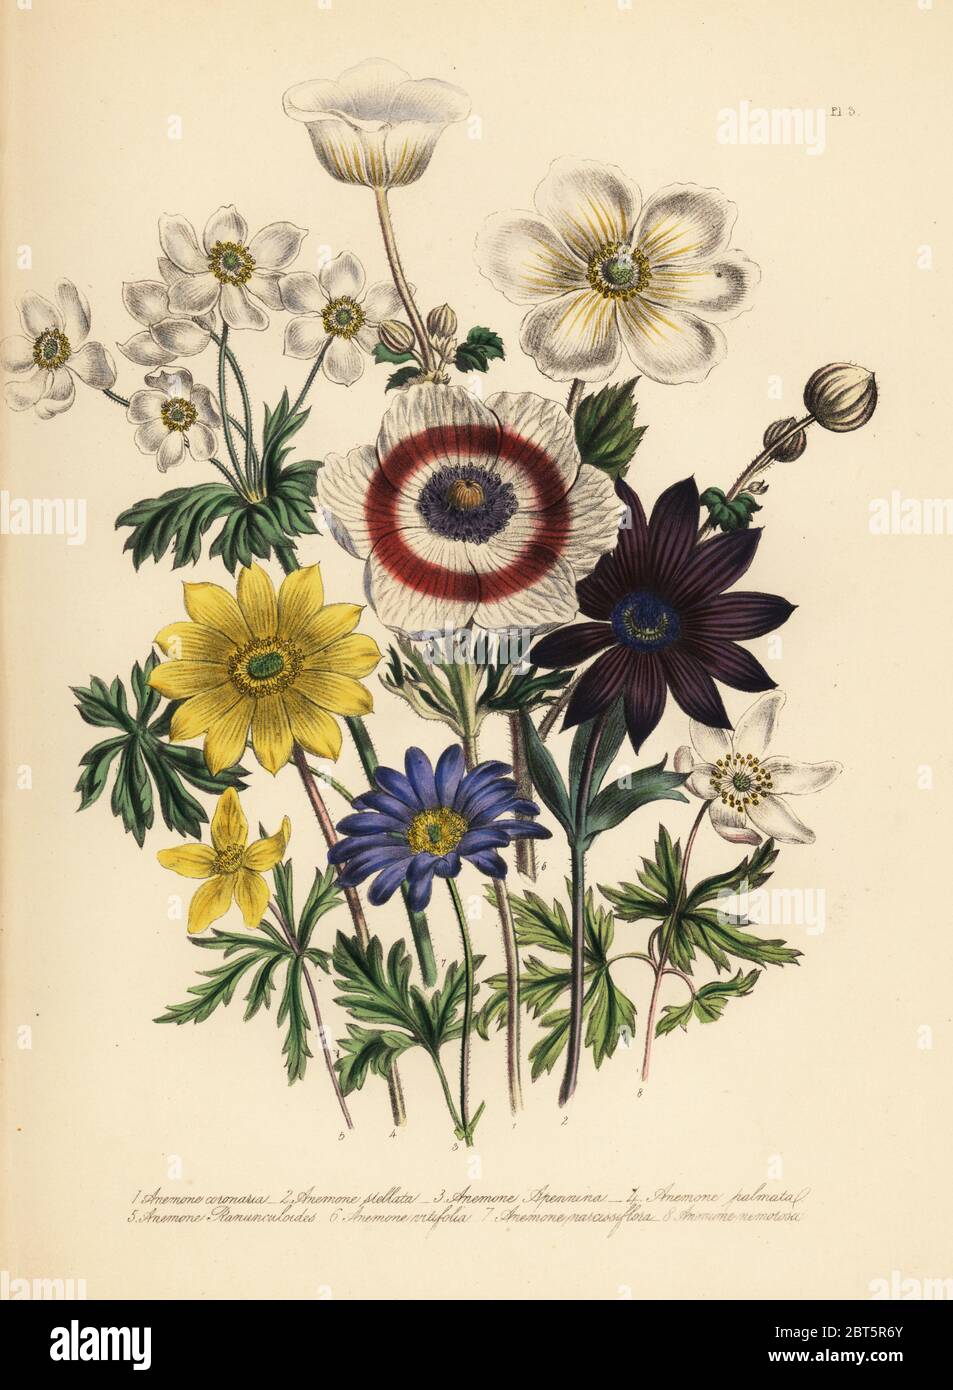 Poppy anemone, Anemone coronaria, star anemone, A. stellata, blue mountain anemone, A. appenia, palmate anemone, A. palmata, yellow wood anemone, A. ranunculoides, vine-leaved anemone, A. vitifolia, narcissus-flowered anemone, A. narcissiflora, and common wood anemone, A. nemorosa. Handfinished chromolithograph by Henry Noel Humphreys after an illustration by Jane Loudon from Mrs. Jane Loudon's Ladies Flower Garden of Ornamental Perennials, William S. Orr, London, 1849. Stock Photo